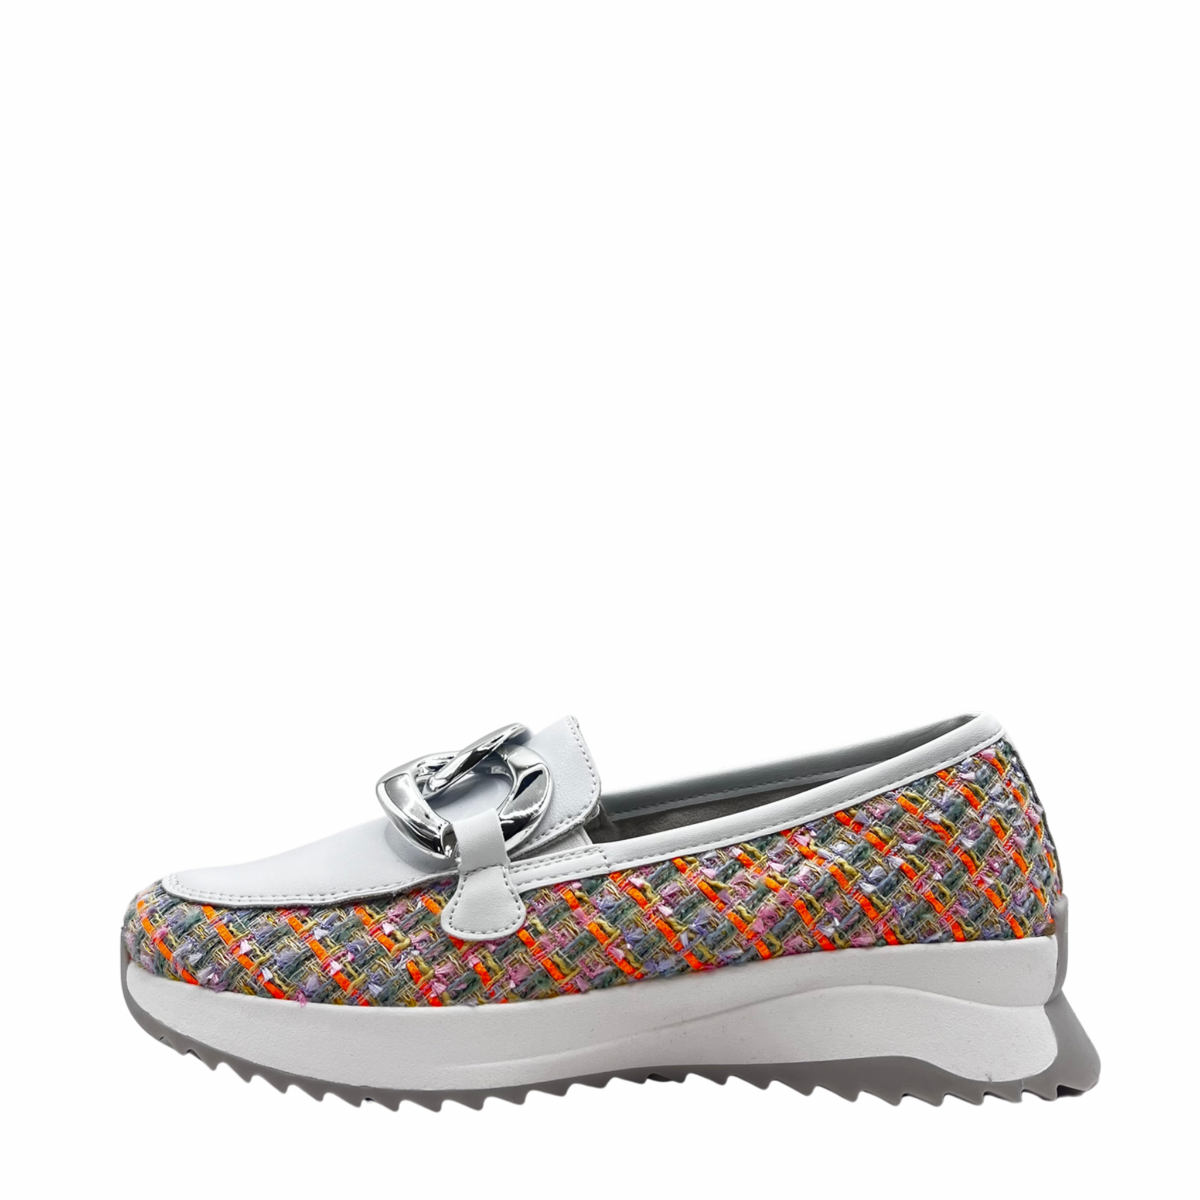 Rieker White and Multi Woven Design Loafers